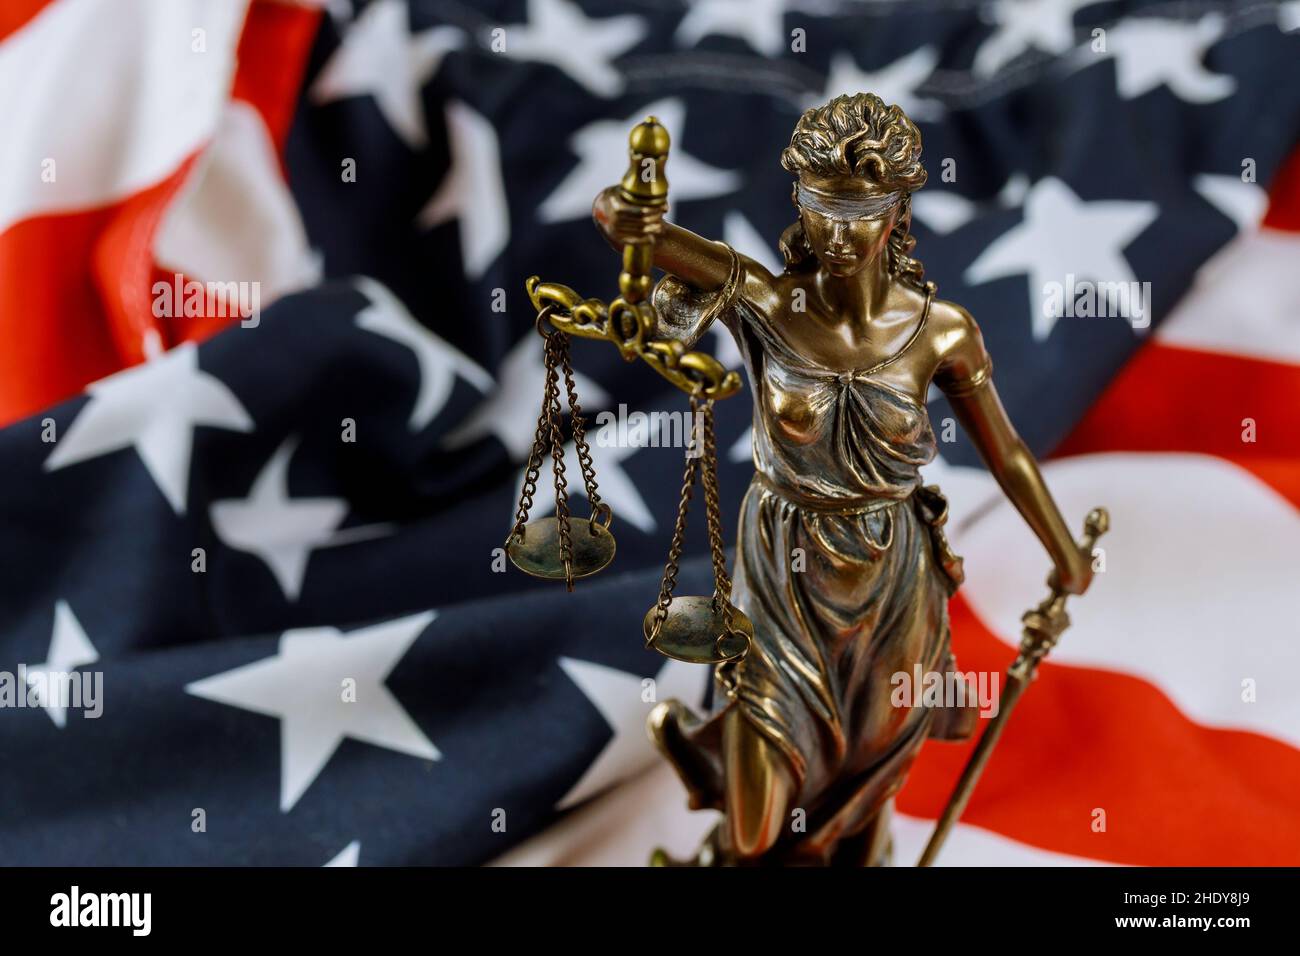 justice, justitia, judiciary, justices, lady justice, lady justices, judiciaries Stock Photo